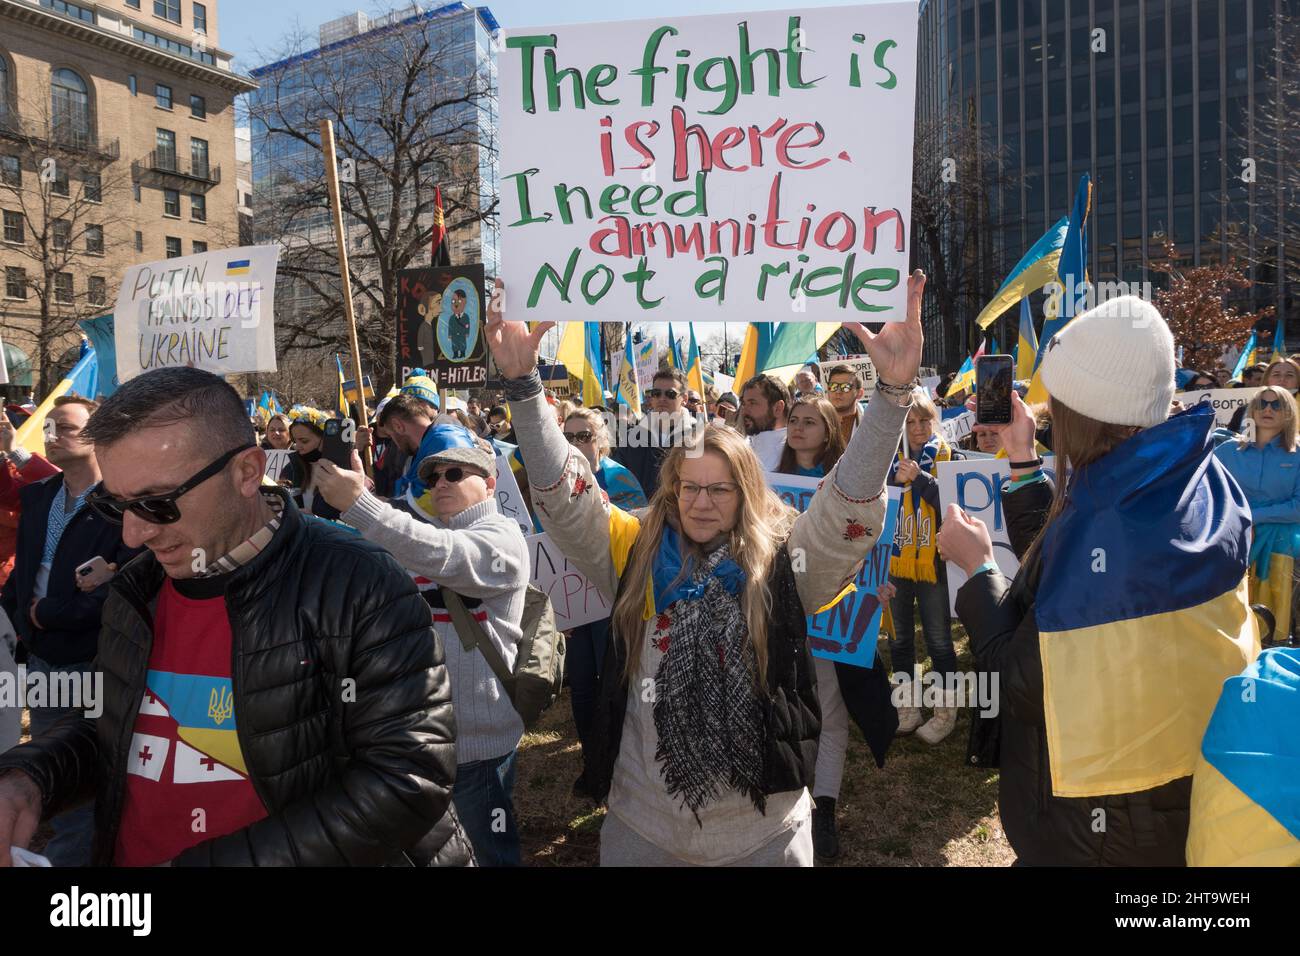 eb. 27, 2022: Ukraine supporters rally at Farragut Square in Washington, DC to protest Russia’s invasion of Ukraine, and to implore President Biden and NATO to take more and stronger action against Vladimir Putin and Russia. A march to the White House followed. Stock Photo